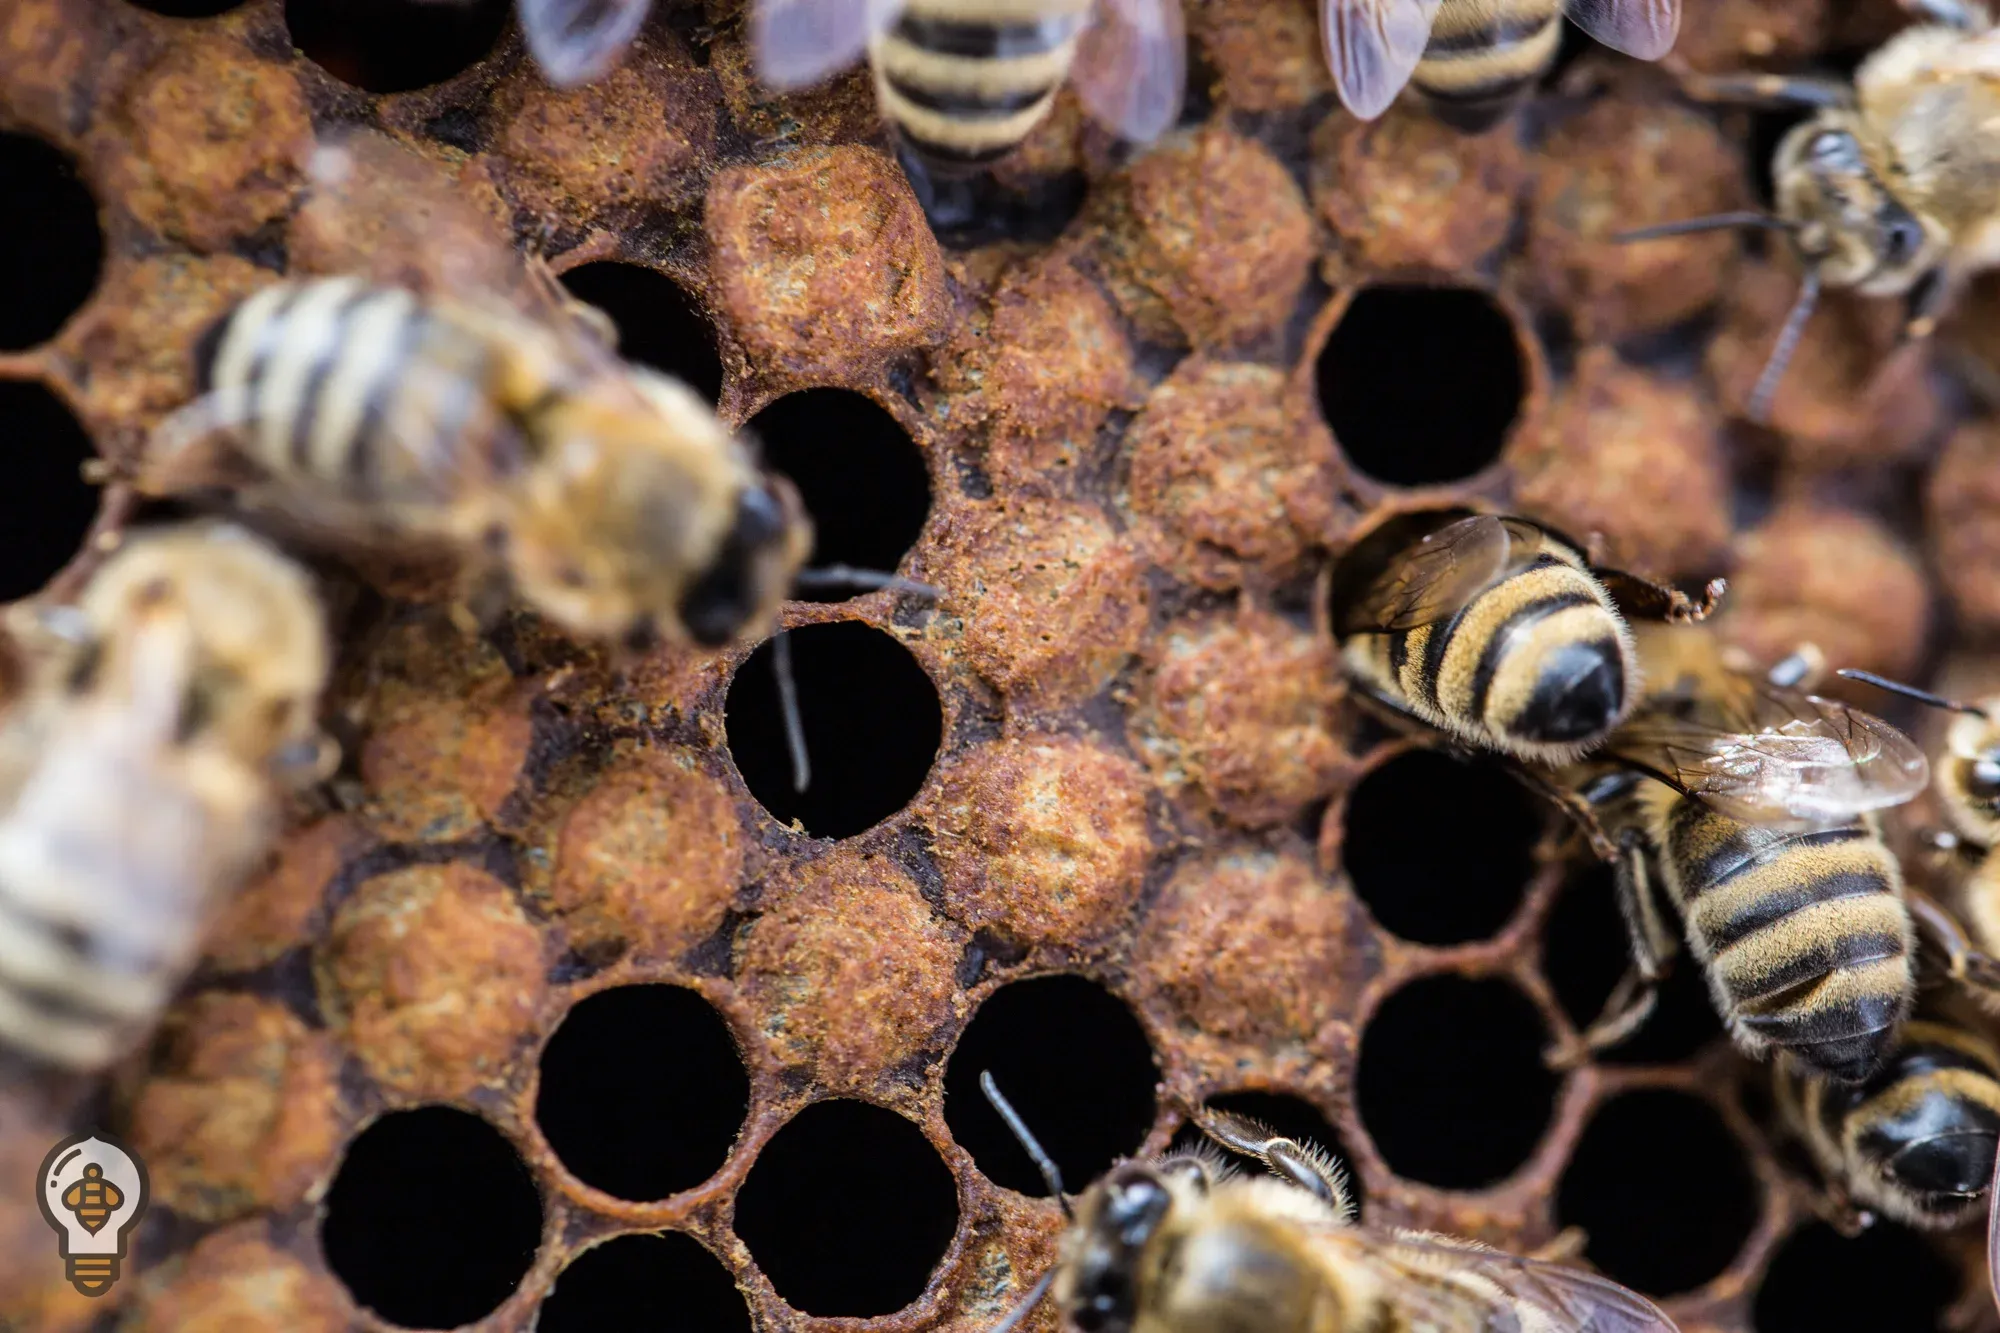 Ozone is used in beehives